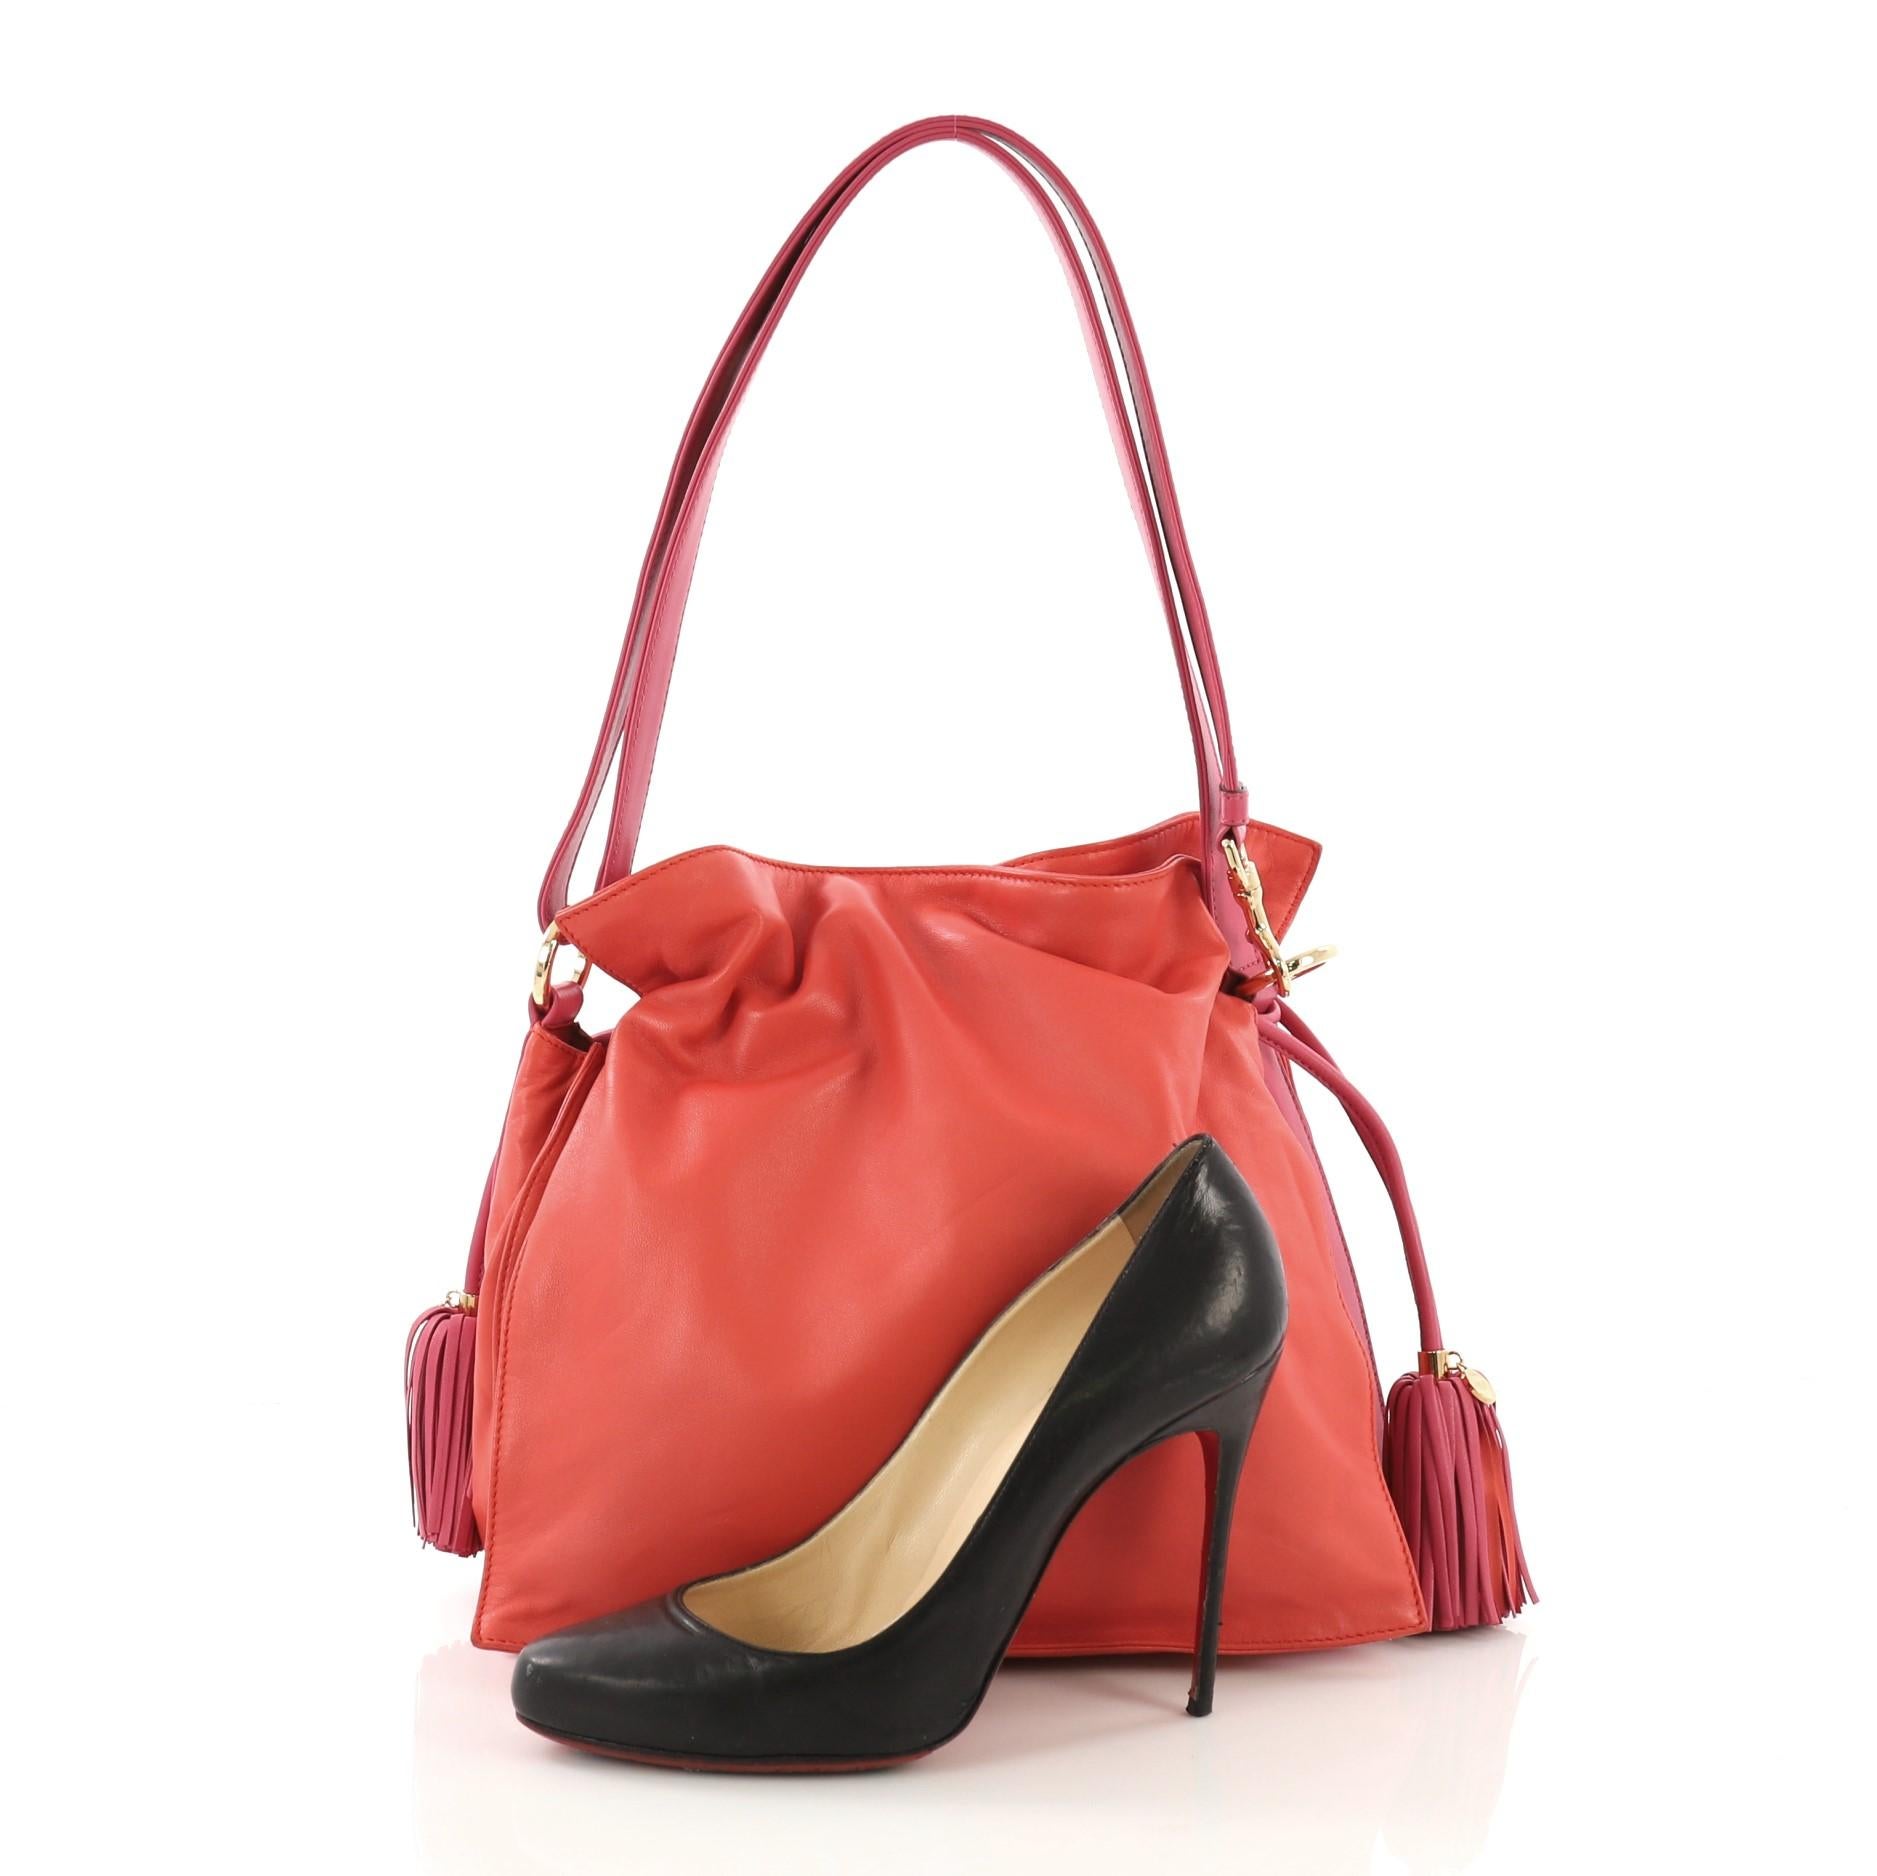 This Loewe Flamenco Bag Leather Medium, crafted in red and pink leather, features leather shoulder strap, drawstring top with tassels, and gold-tone hardware. Its drawstring closure opens to a red fabric interior divided into three compartments with